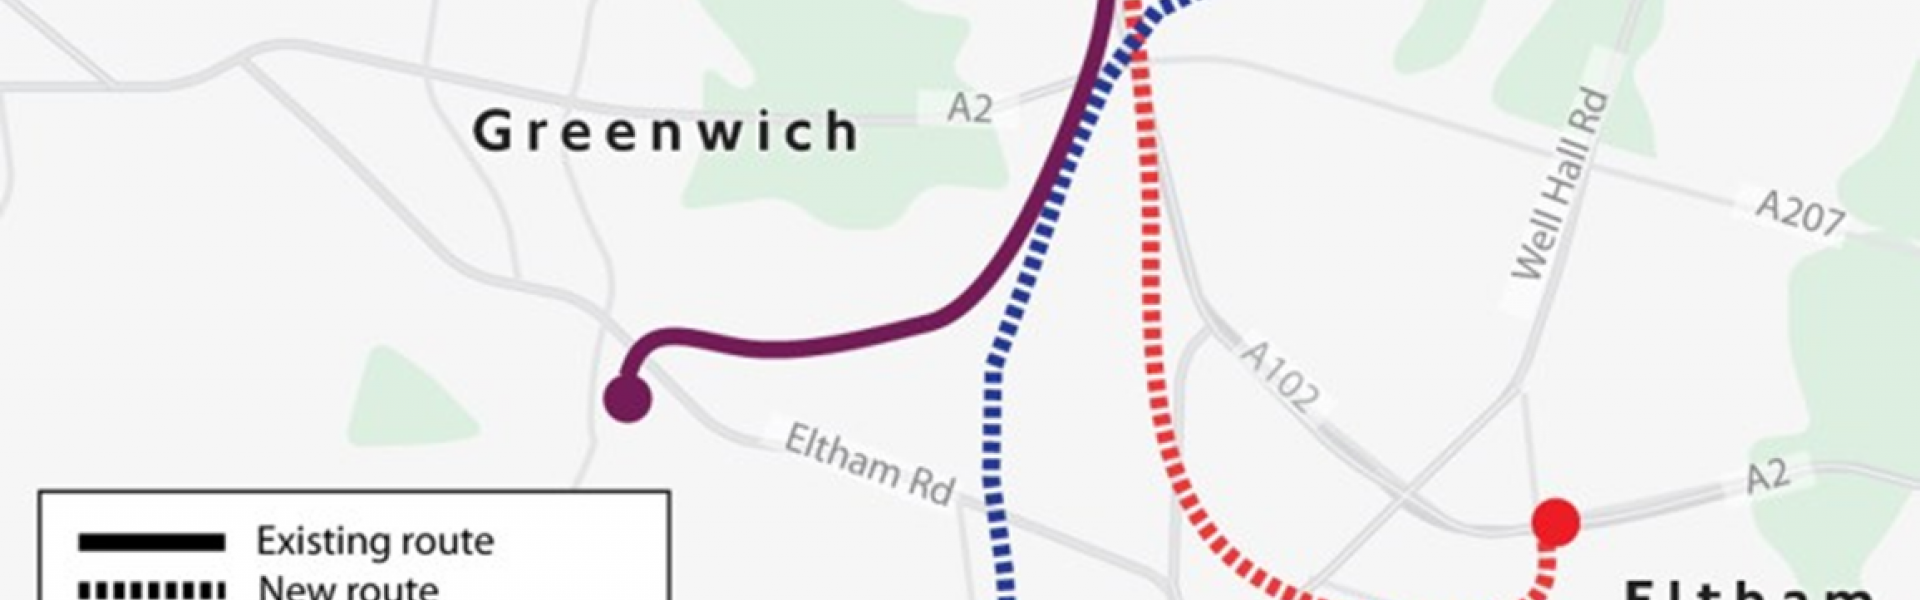 Map of the promised Eltham to Beckton bus route